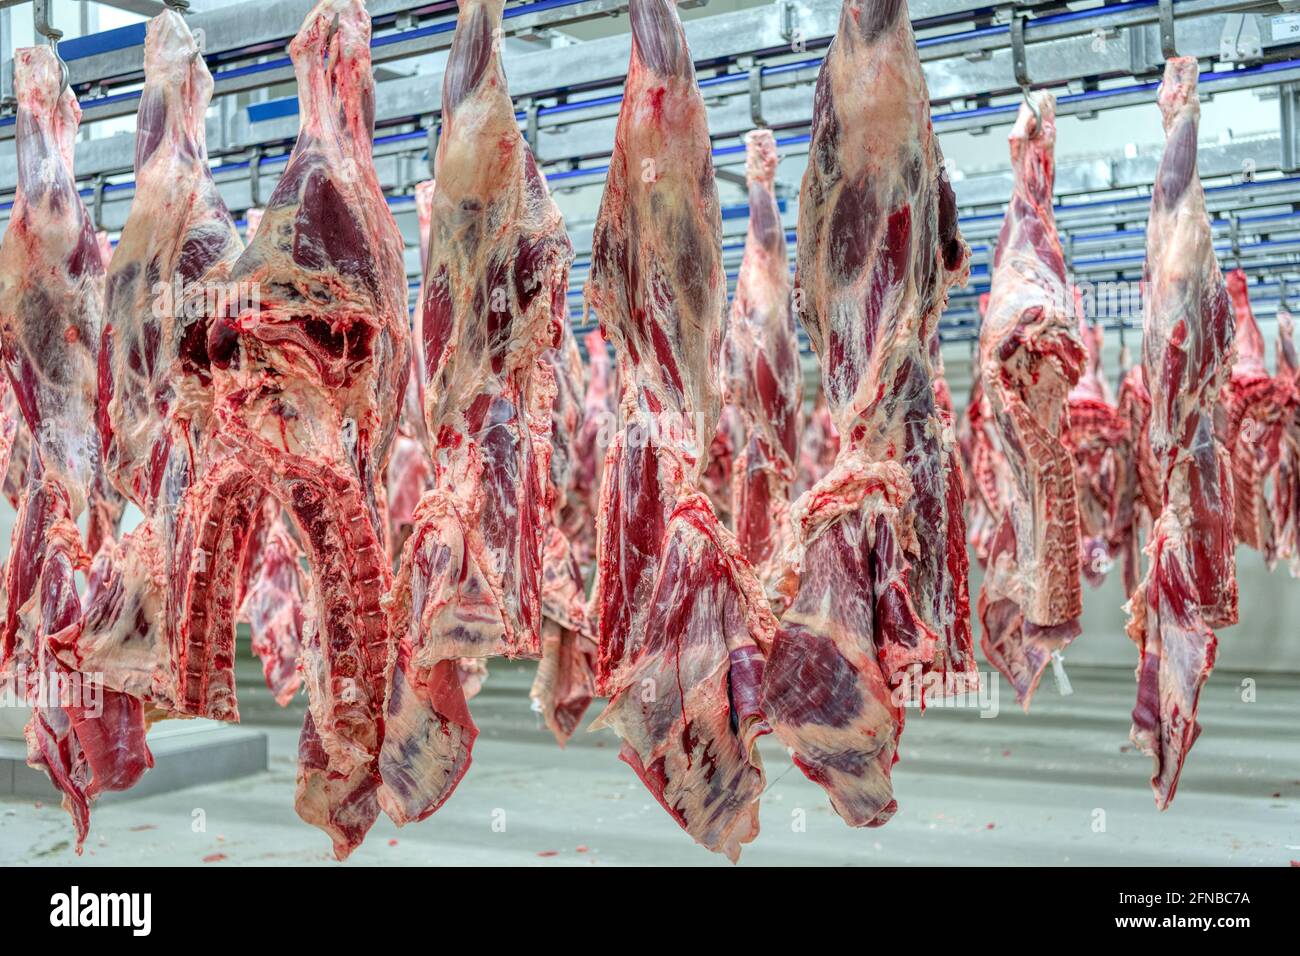 The beef carcasses are hanging in the large refrigerator. Stock Photo